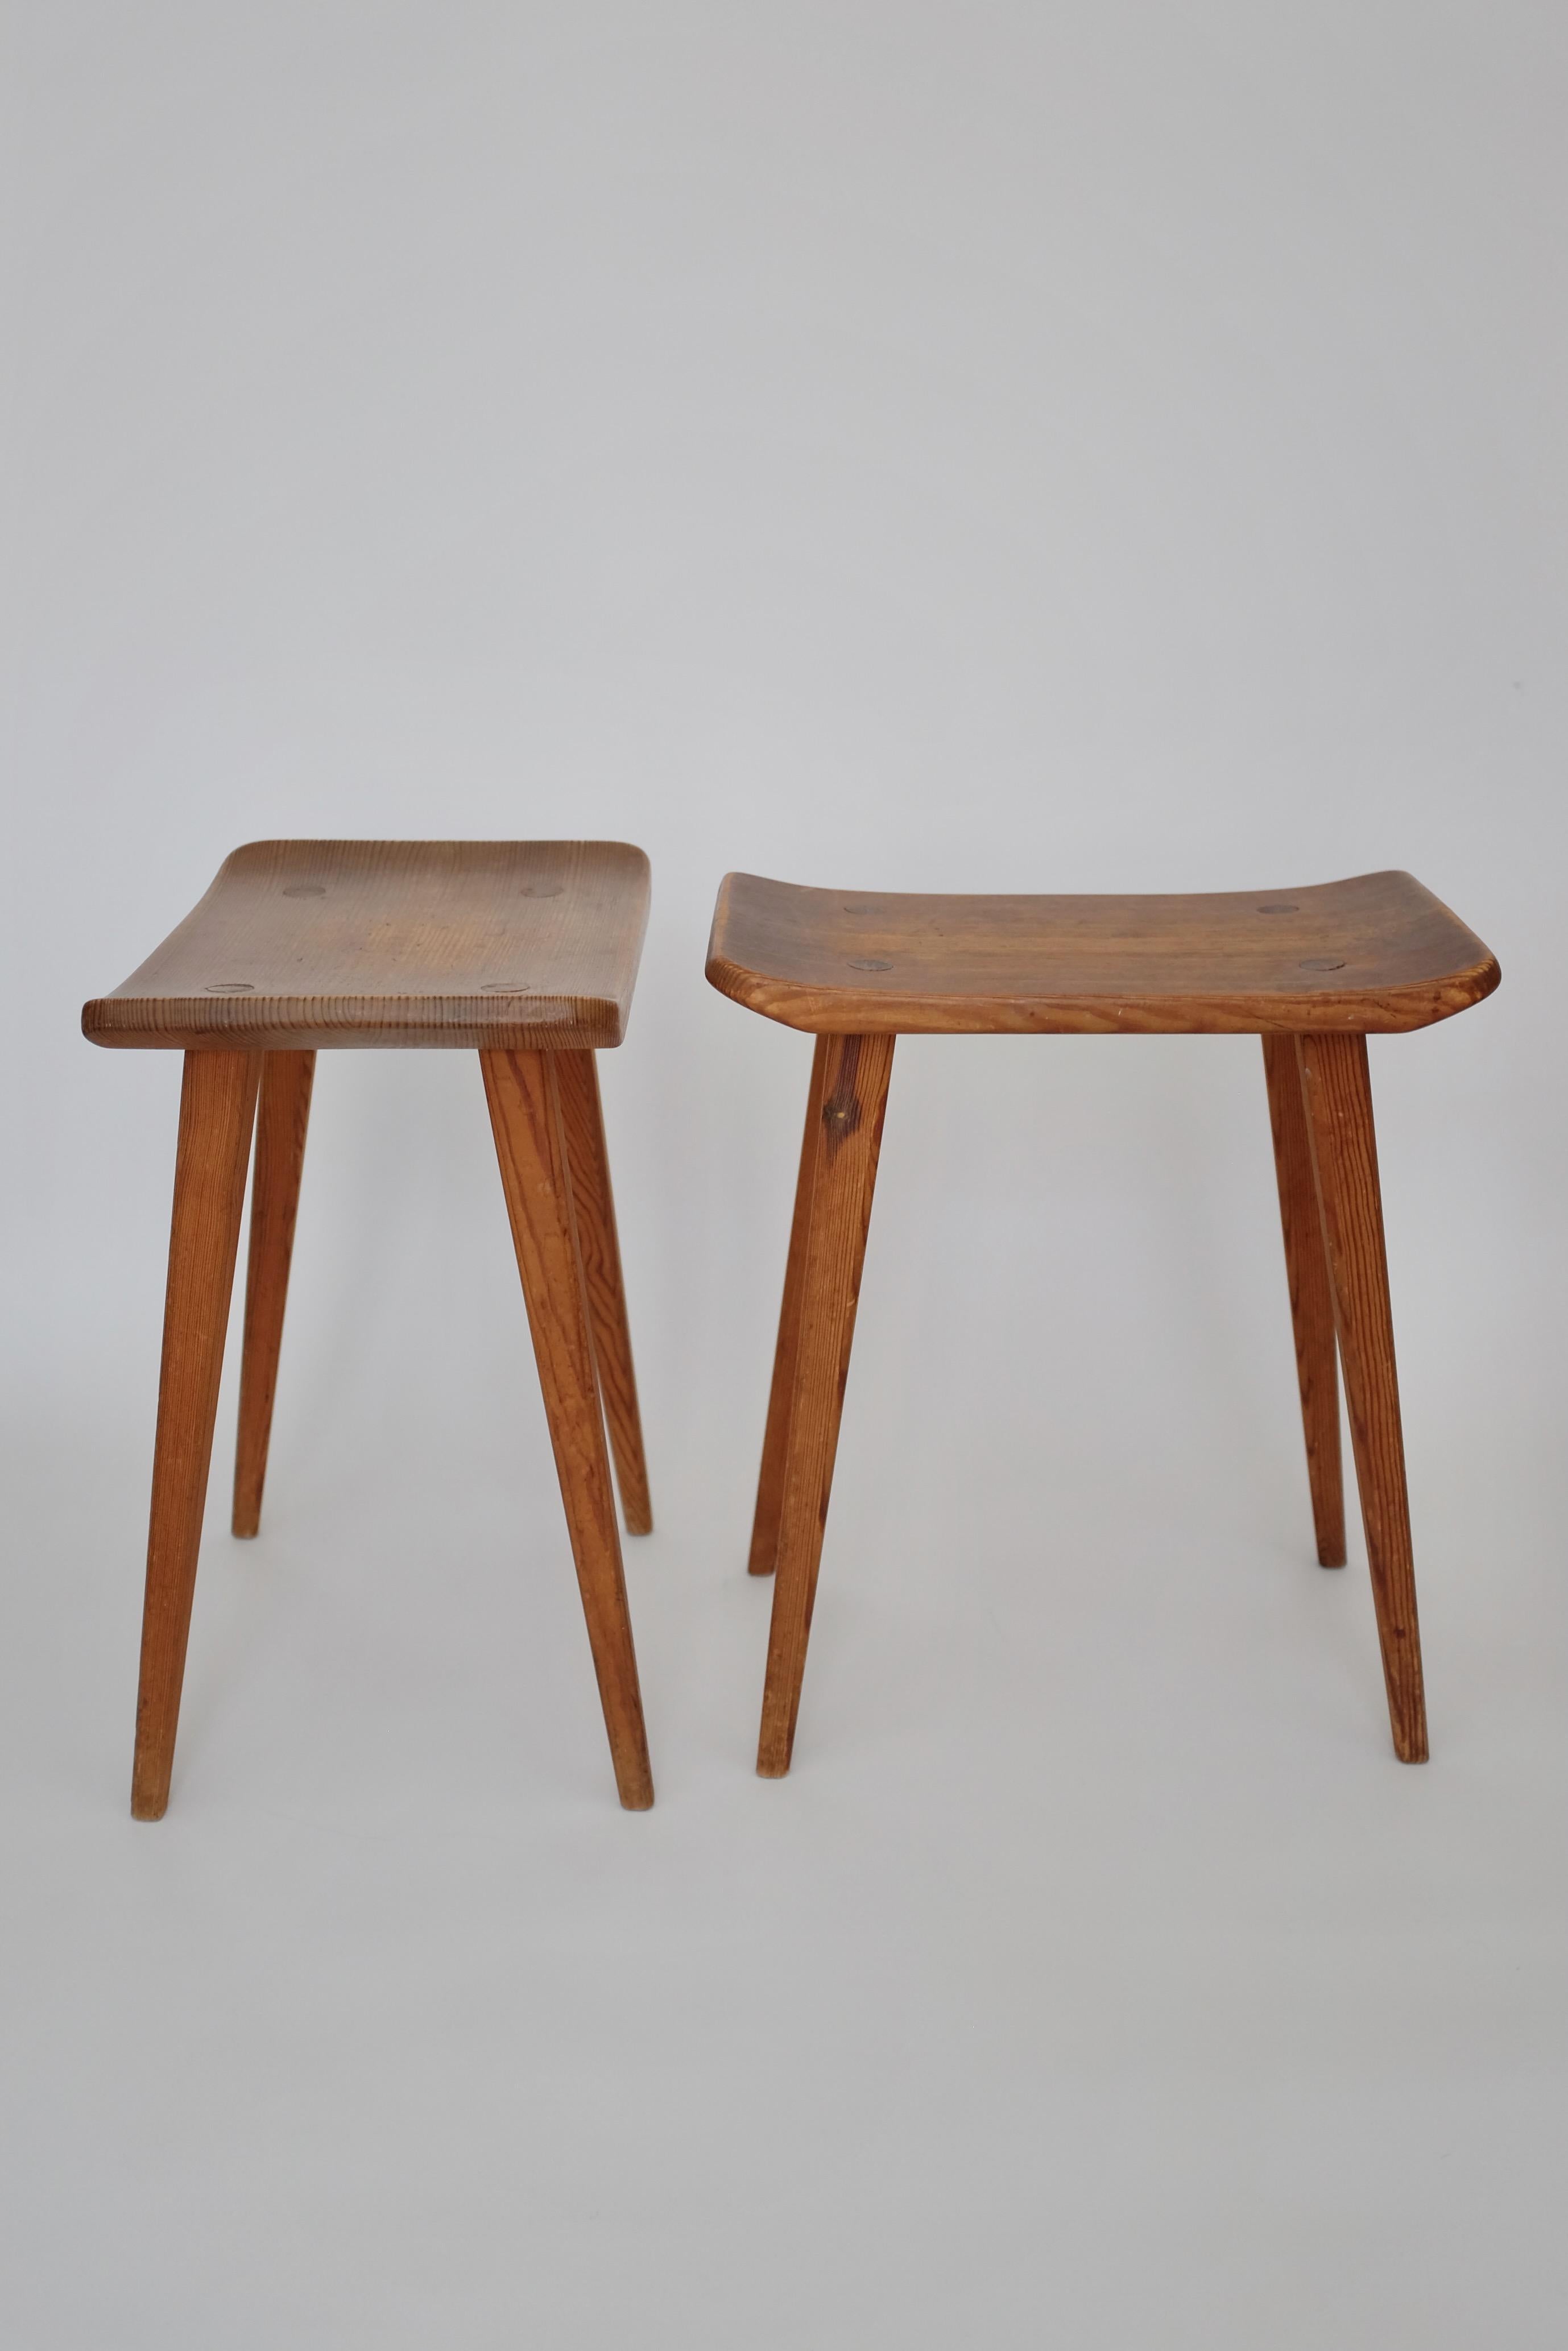 Charming Pair of Vintage Pine stools in model Visingsö by Carl Malmsten. Marked with the makers initials CM underneath and probably made by Carl Malmstens own studio sometime during the mid 20th century. The model was initially designed in 1953 and